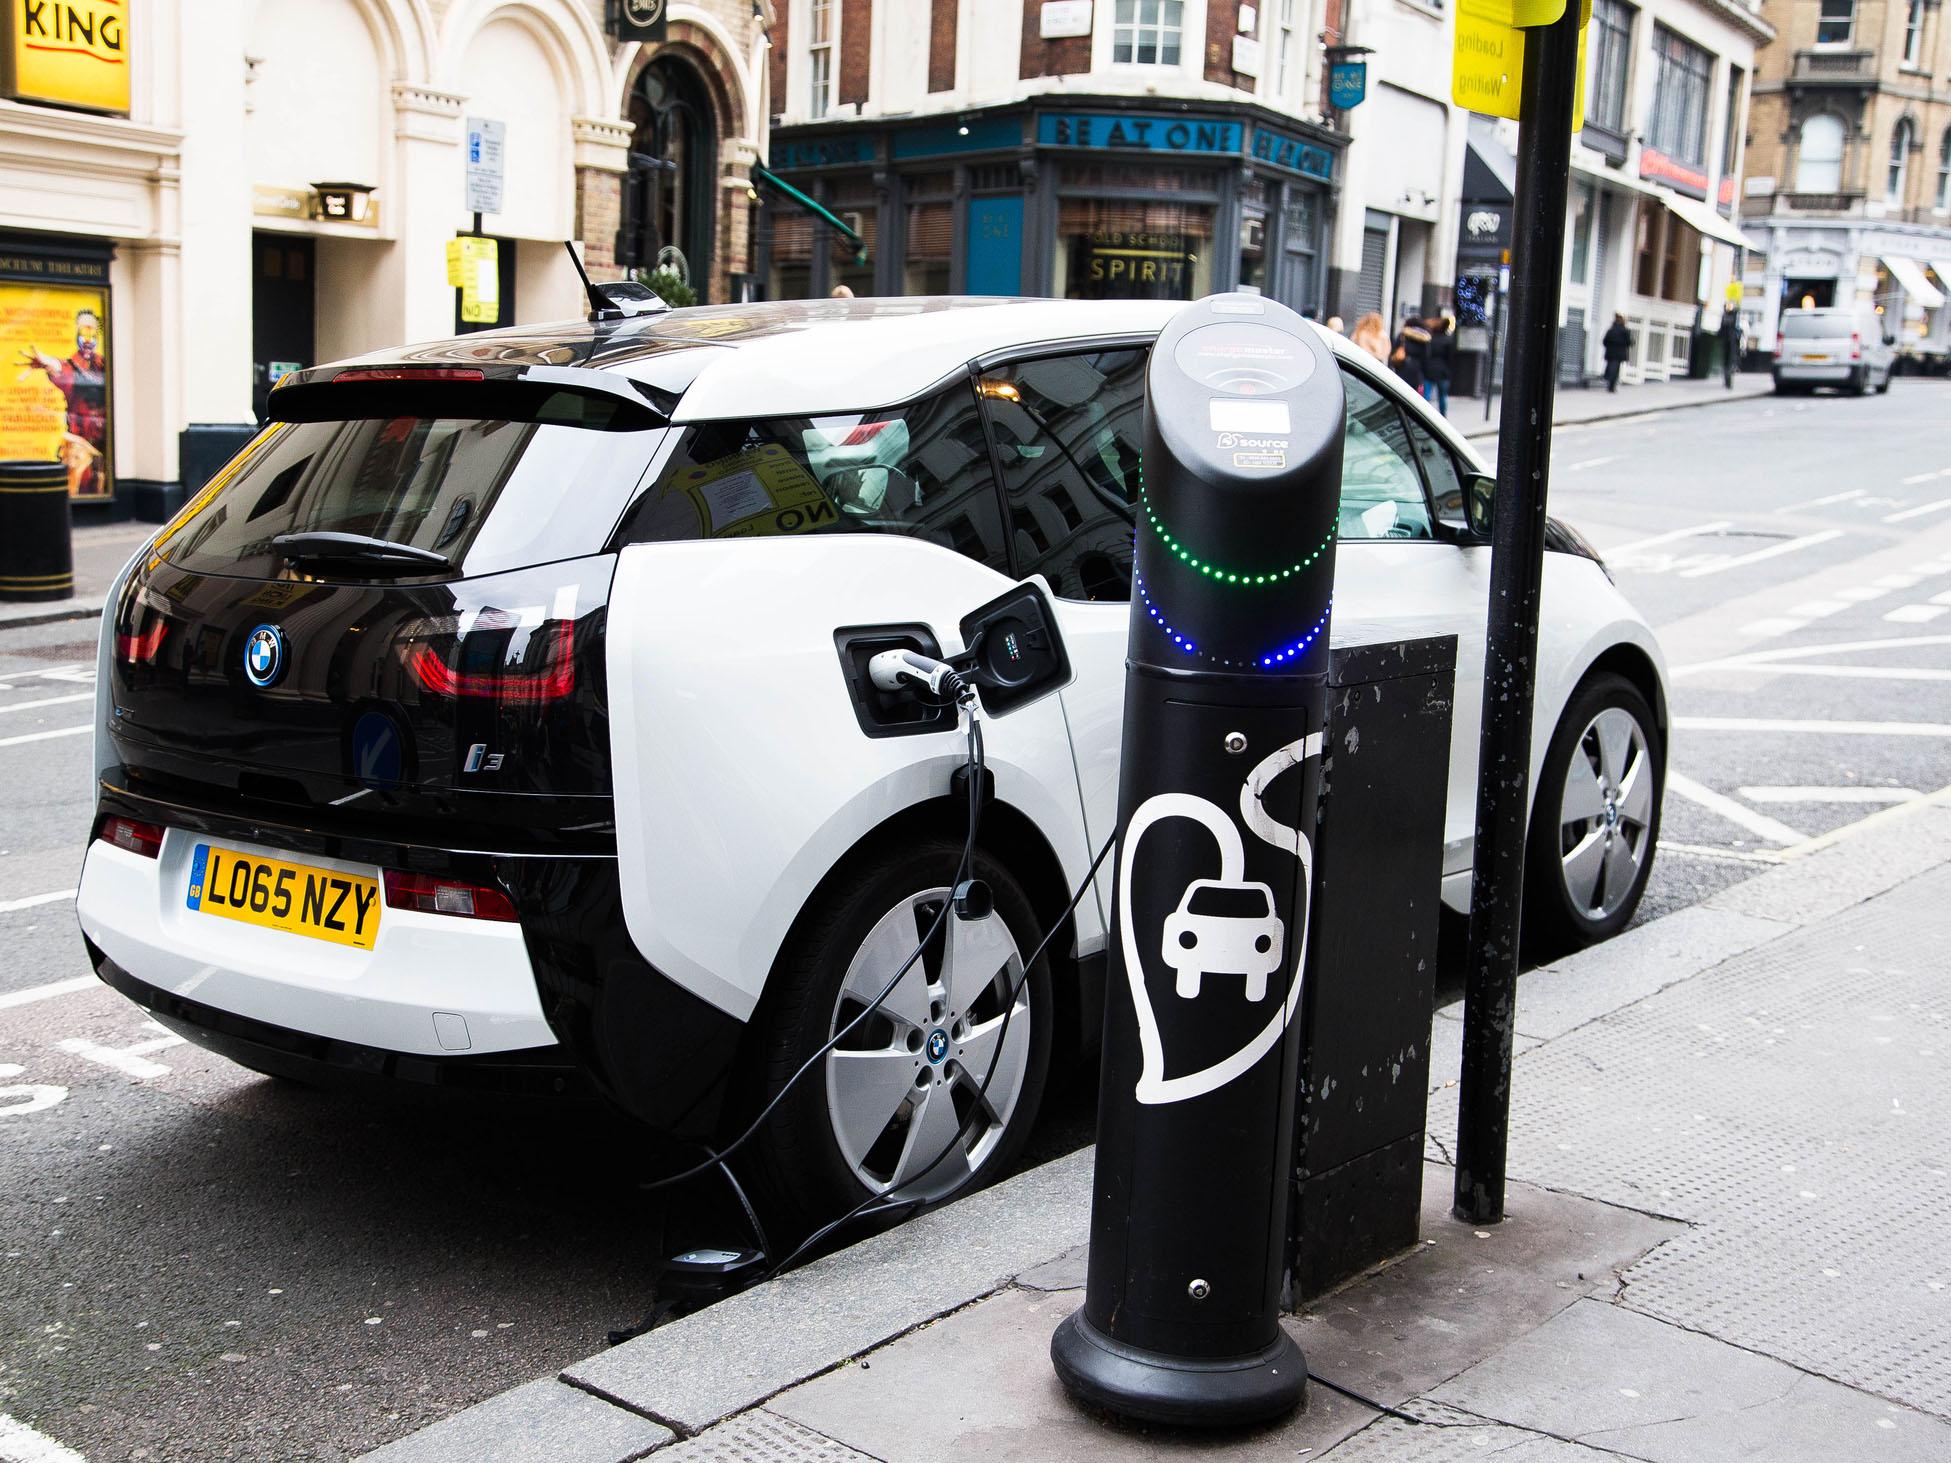 Industry experts have warned that a lack of charging facilities may hold back the roll-out of electric vehicles in the UK